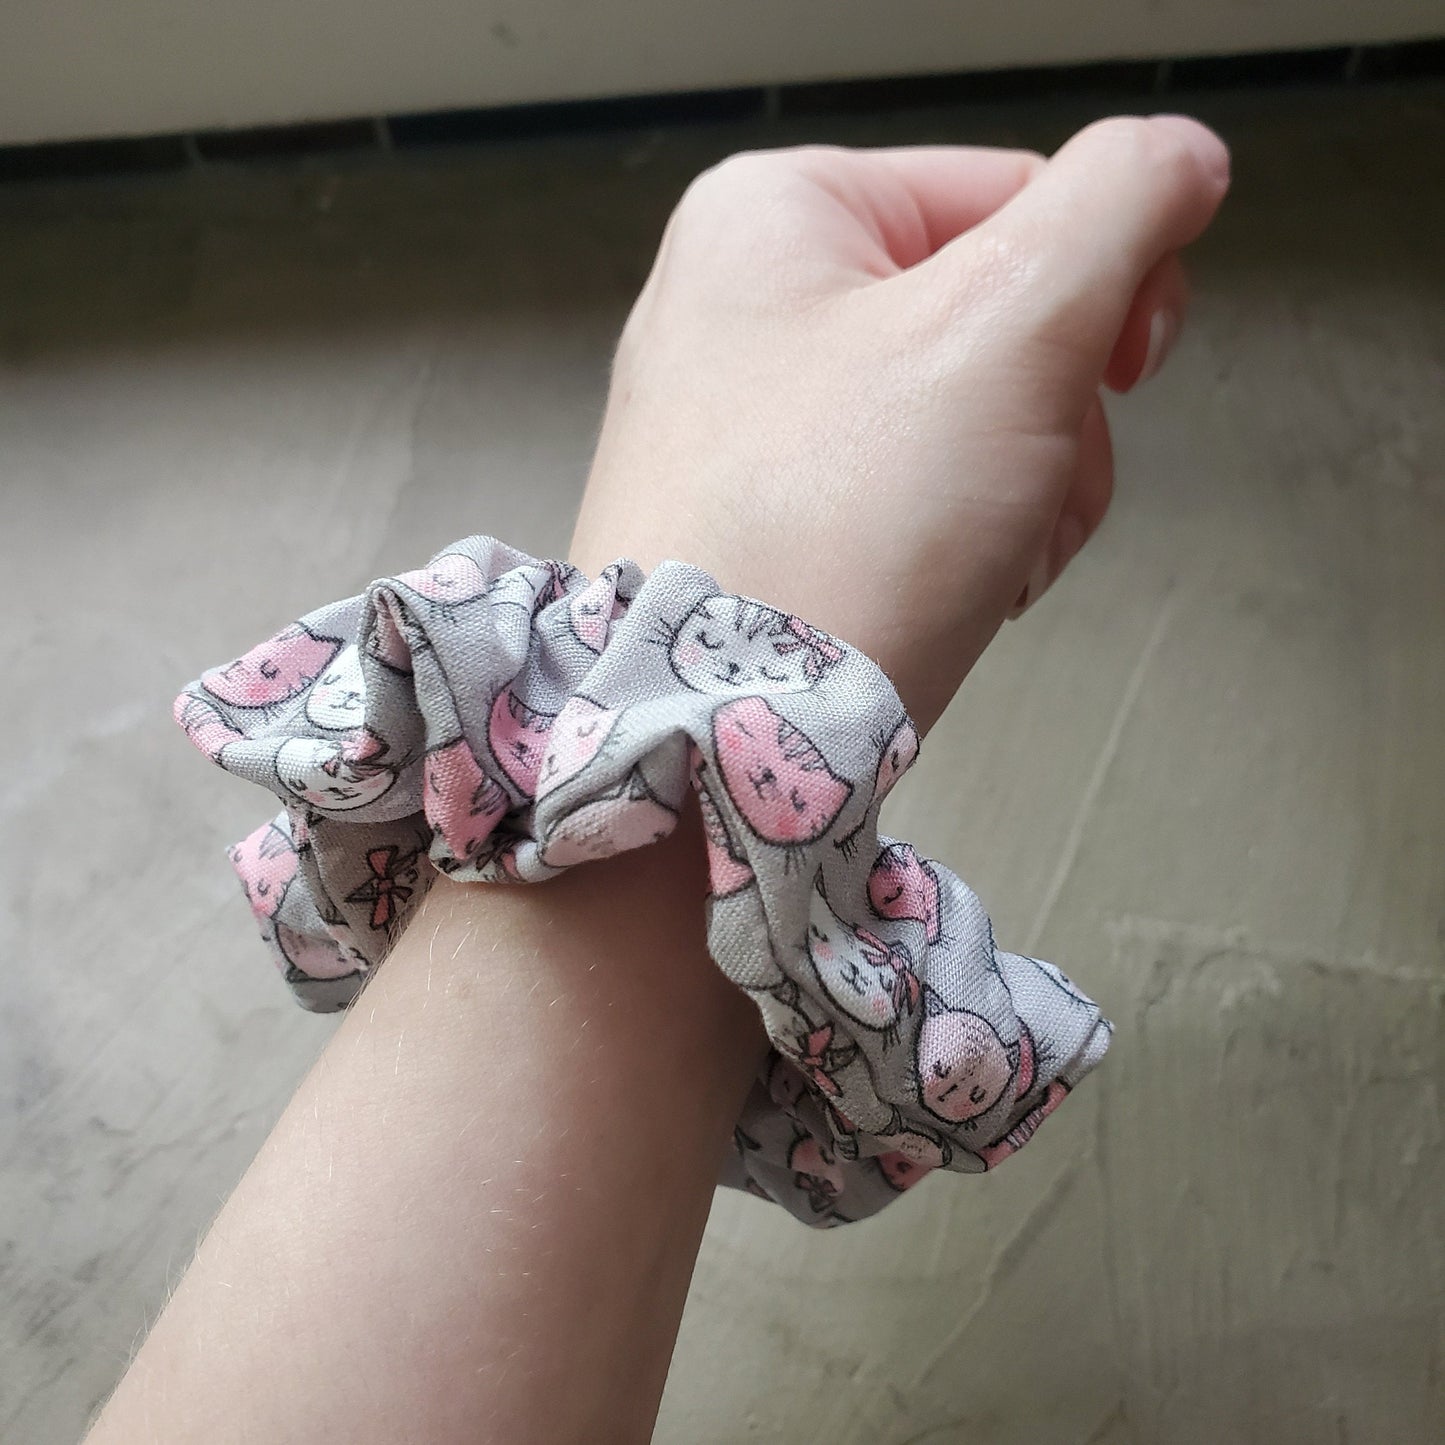 Grey and Pink Biodegradable Scrunchie on my wrist to show the size. It sticks out about an inch from my arm.